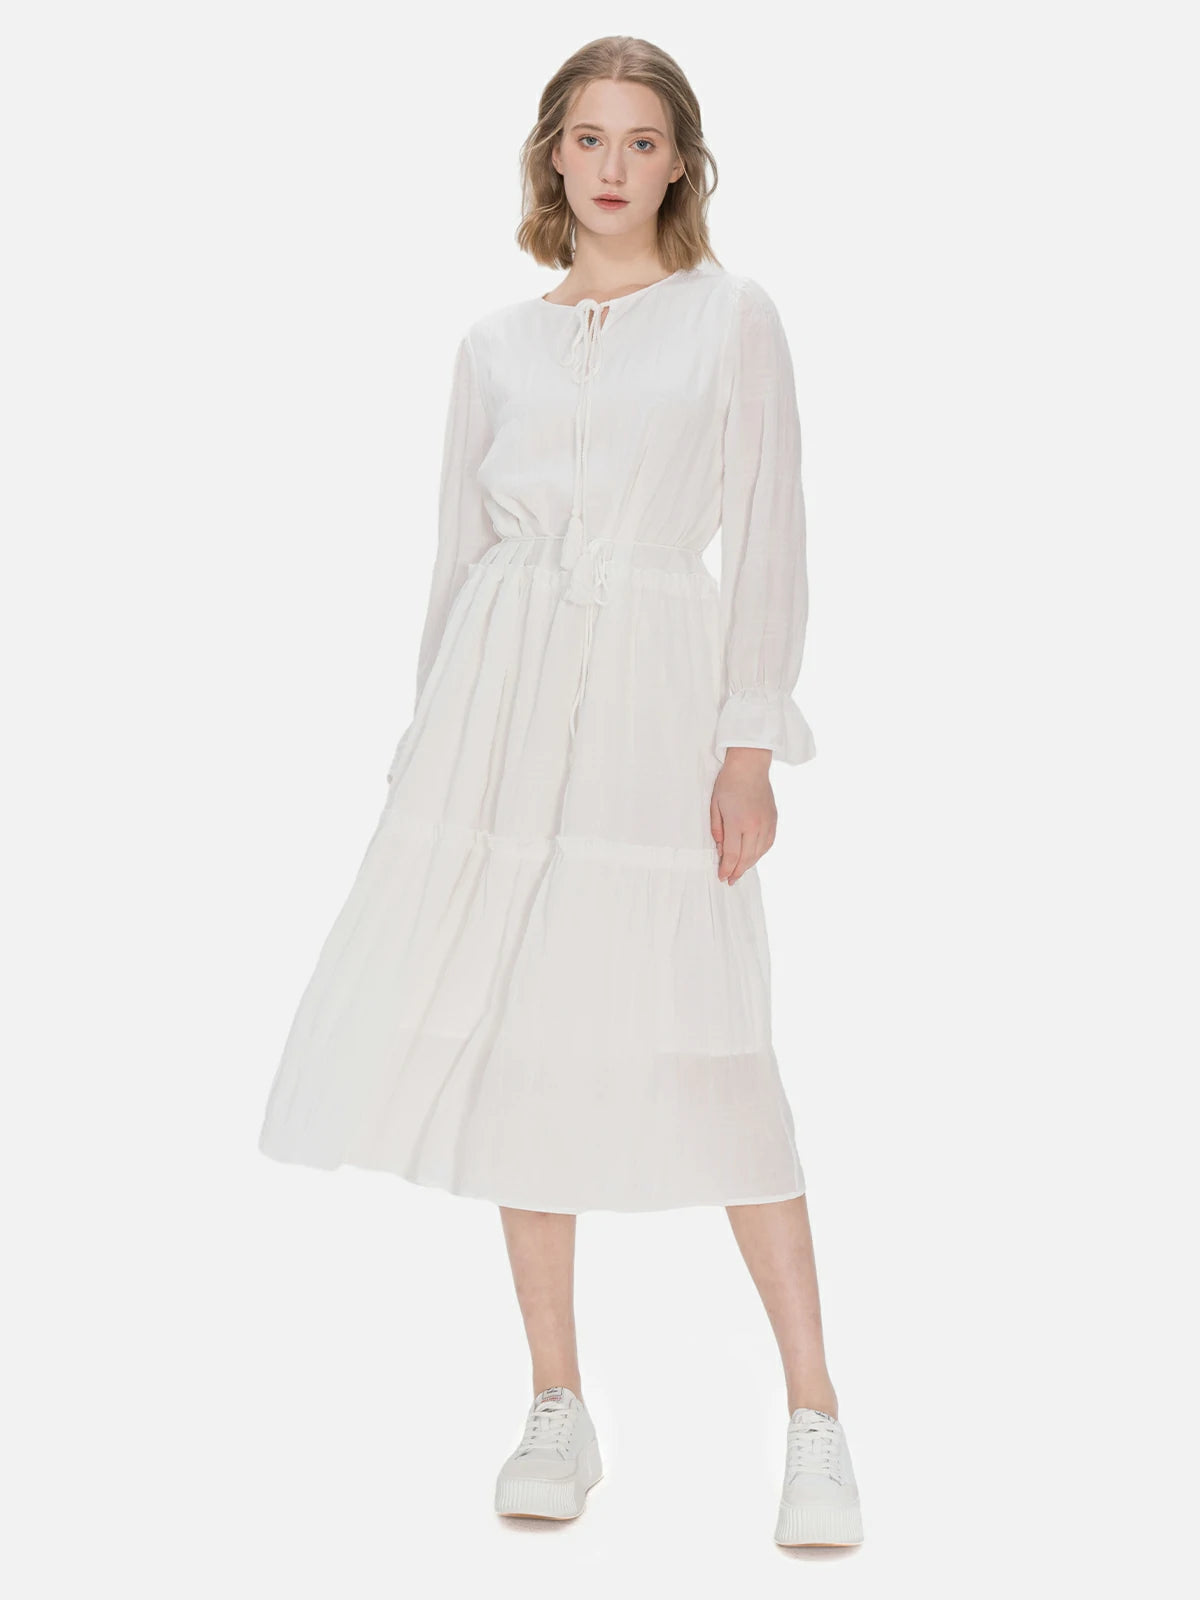 Elegant mid-length dress in fresh white design with neckline and waist tie details, perfect for a versatile and fashionable look.